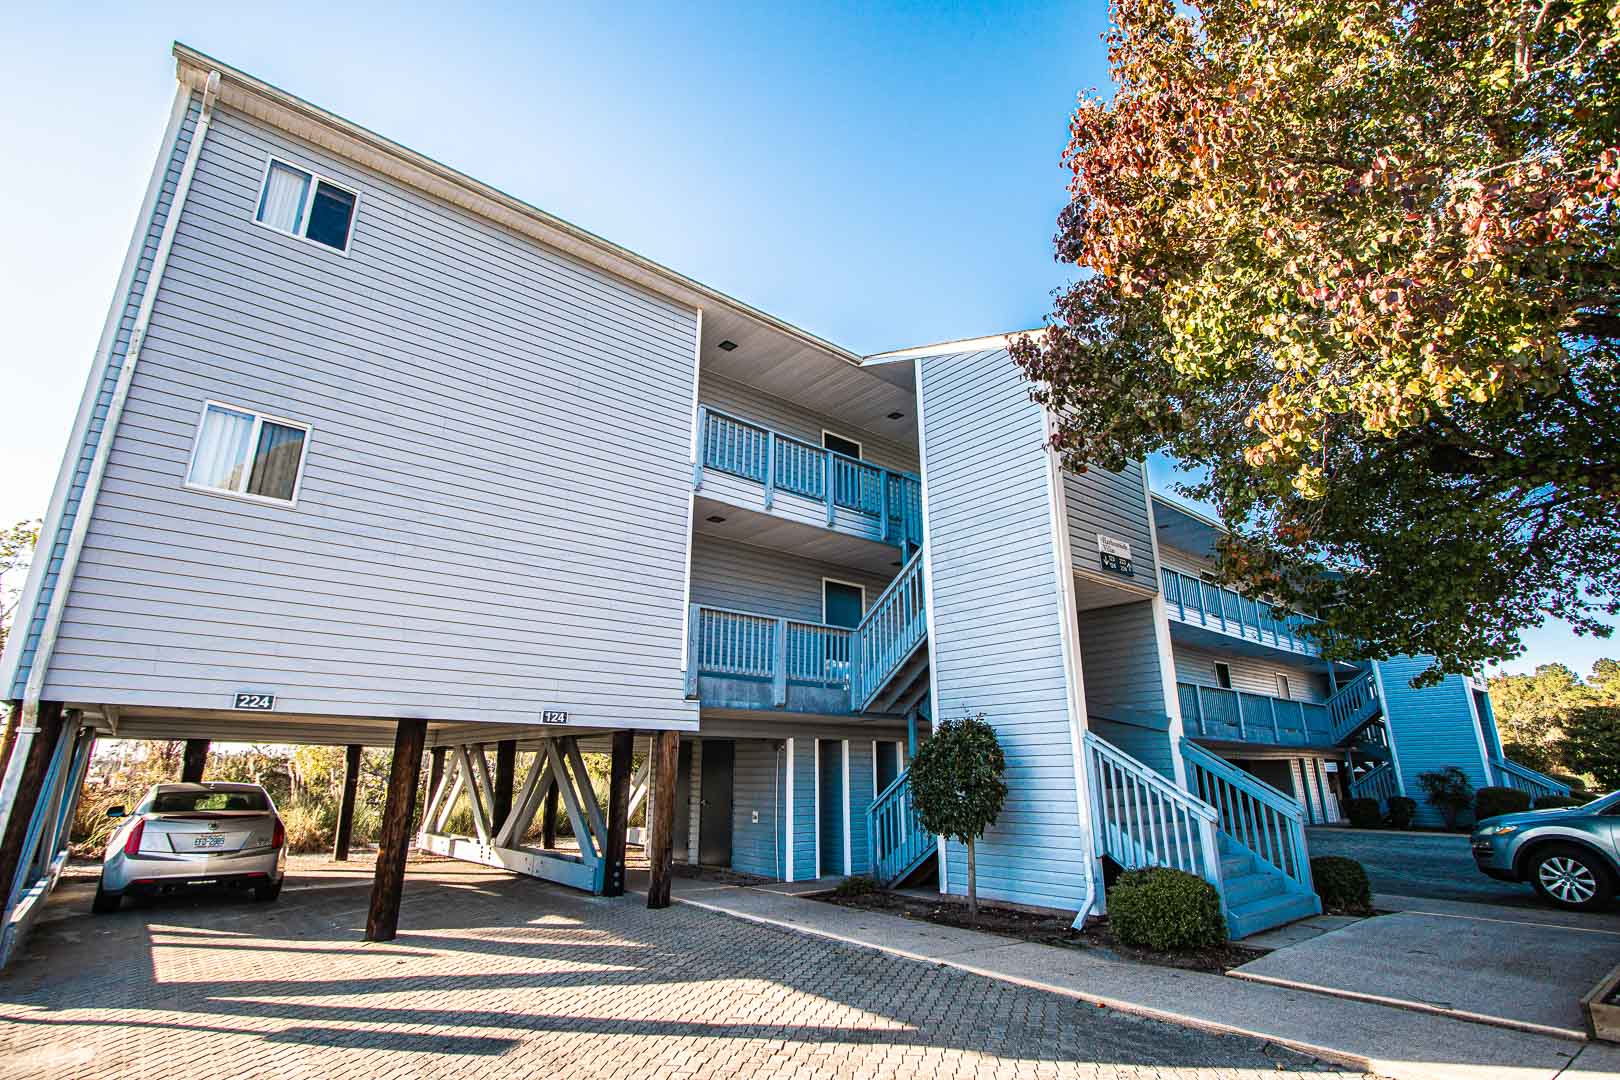 An outside view of the units at VRI's Harbourside II in New Bern, North Carolina.